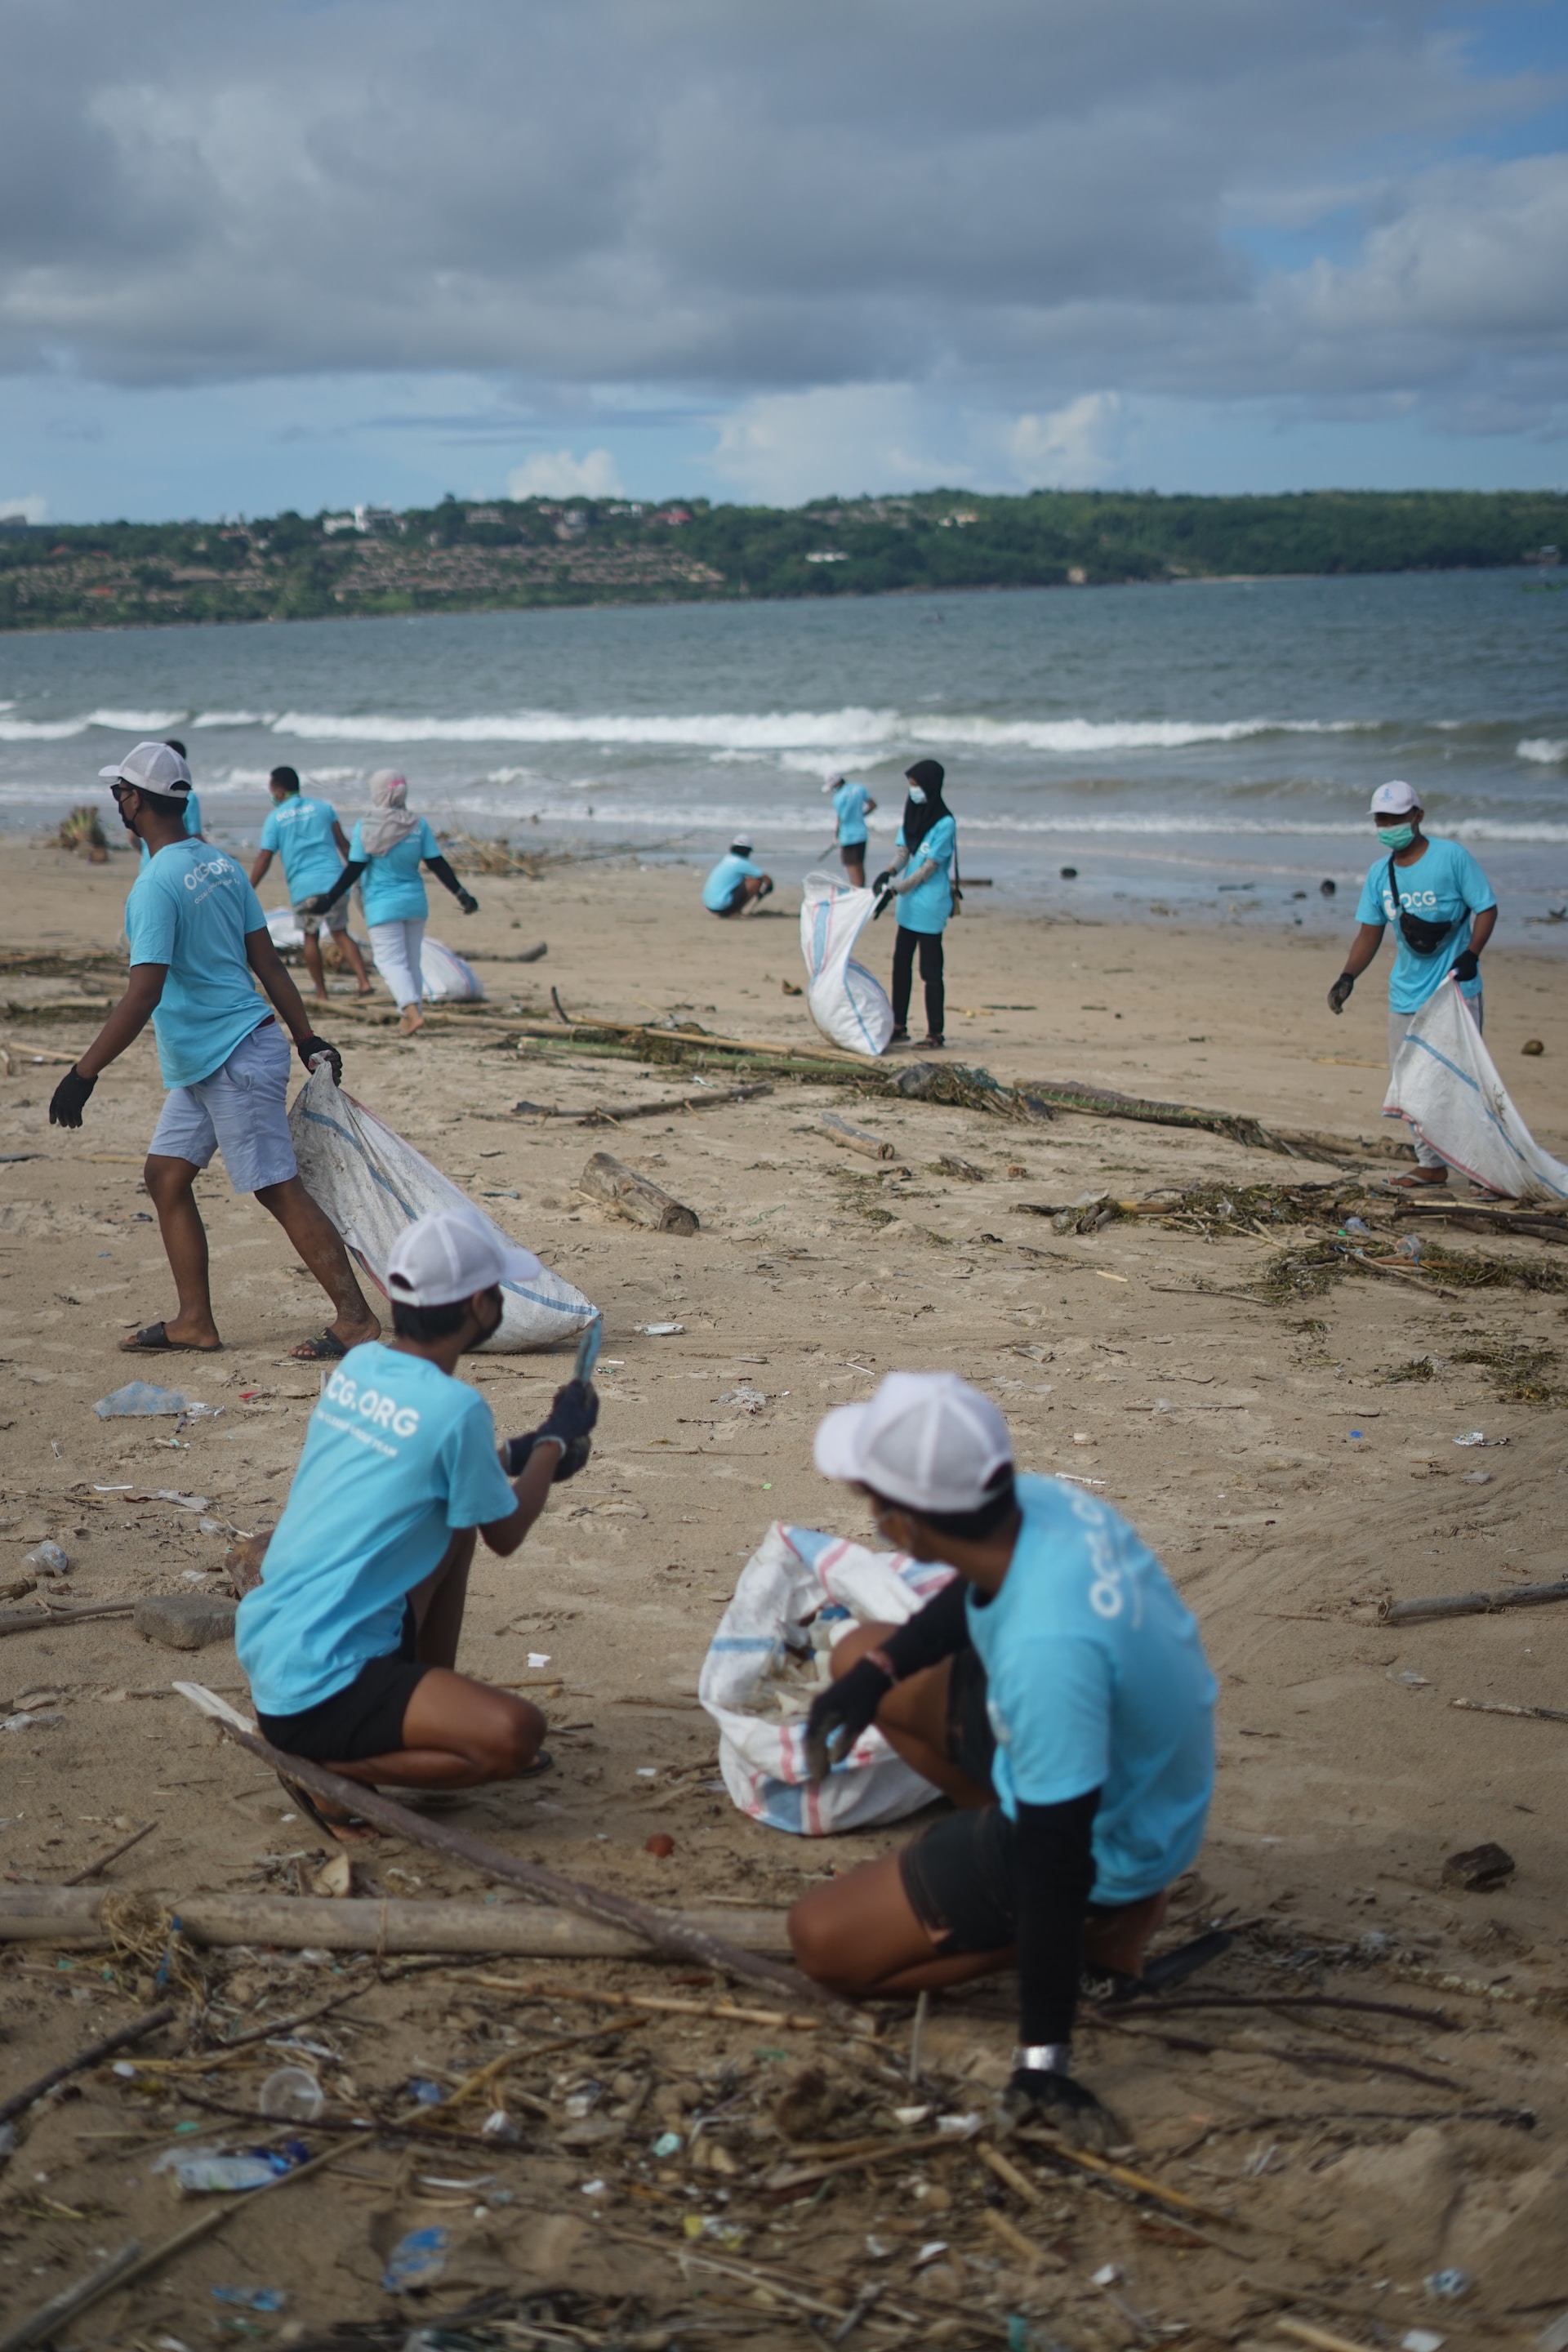 Ocean Cleanup Group in Bali, Indonesia removing plastic pollution from a beach.